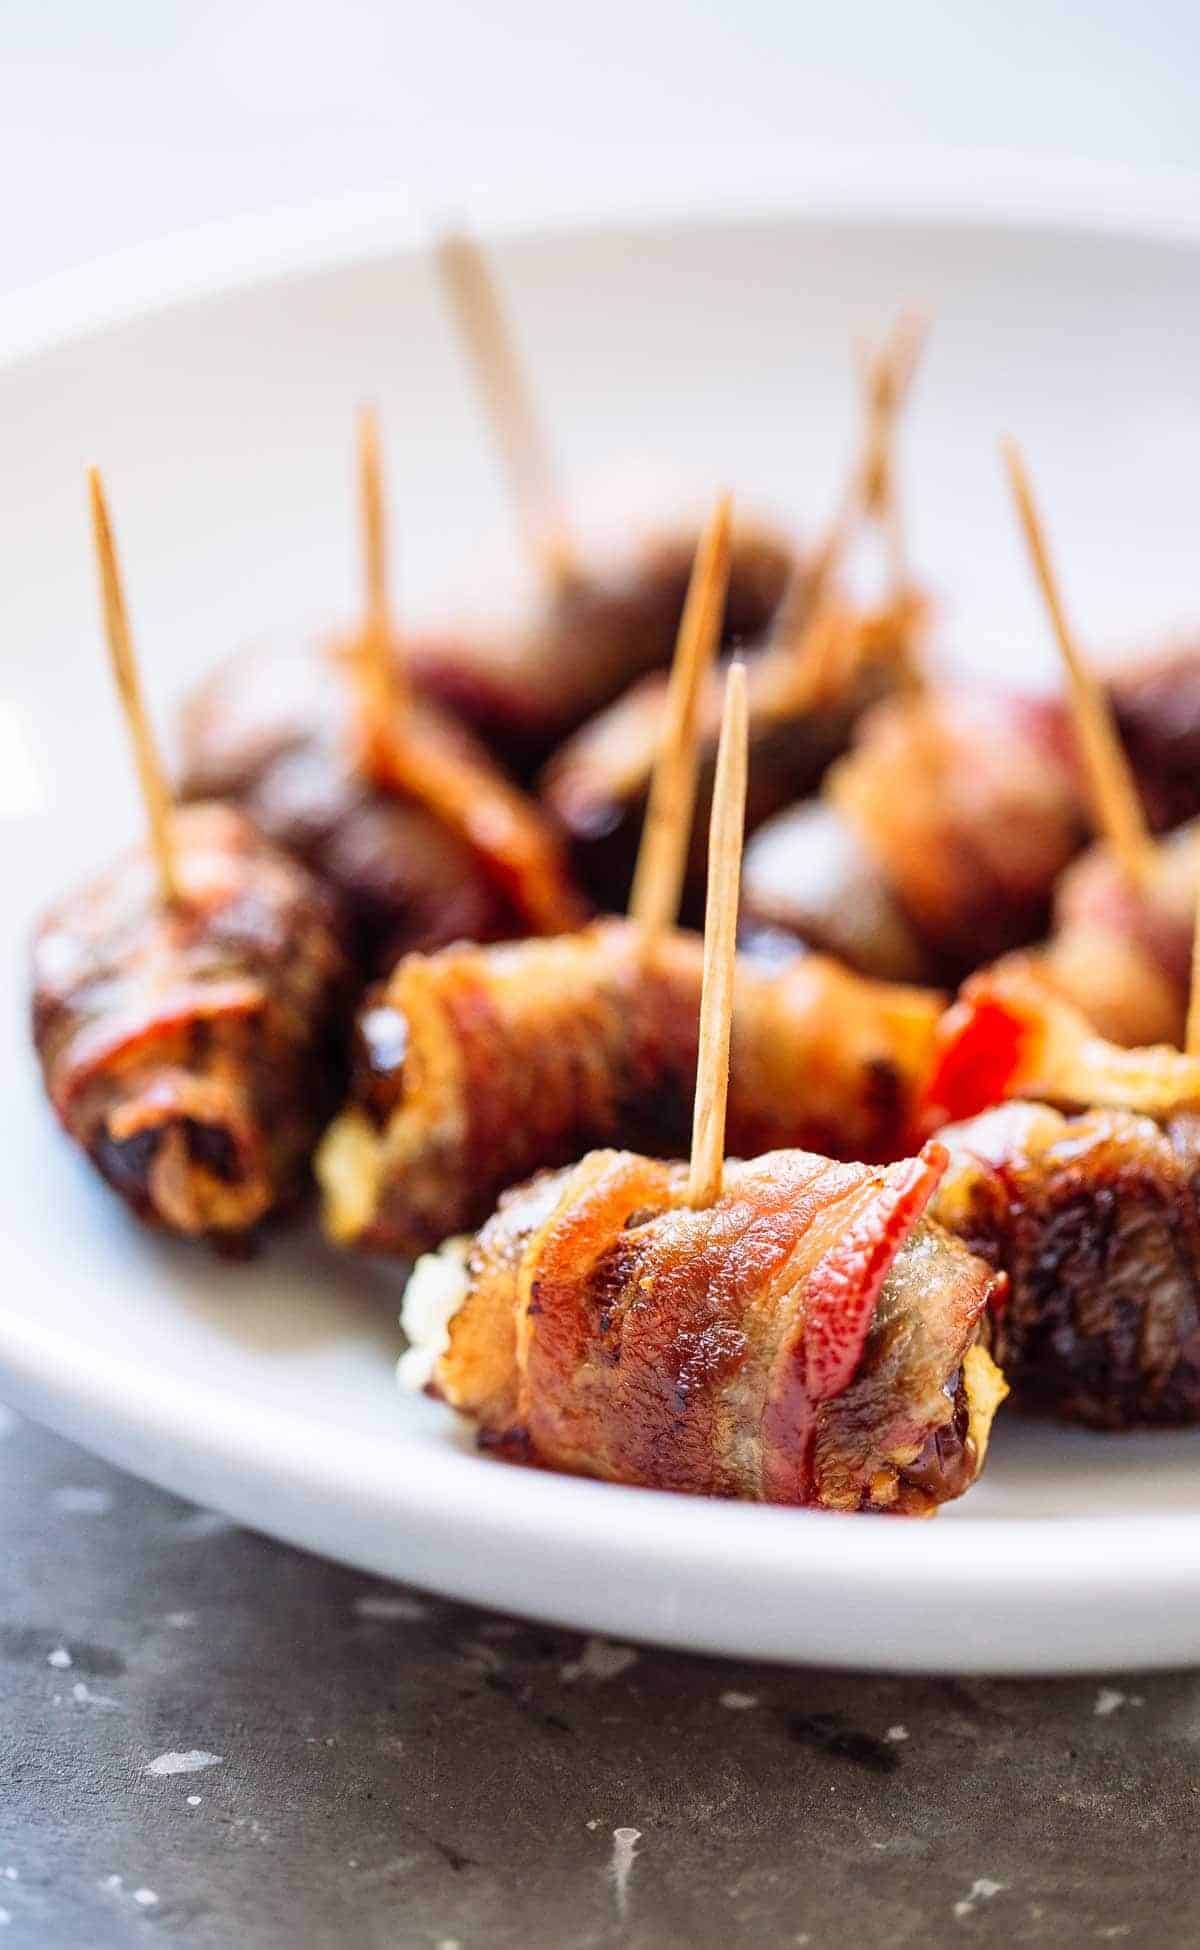 Bacon Wrapped Dates with Goat Cheese - a super easy 3-ingredient appetizer recipe that will blow you away! | pinchofyum.com